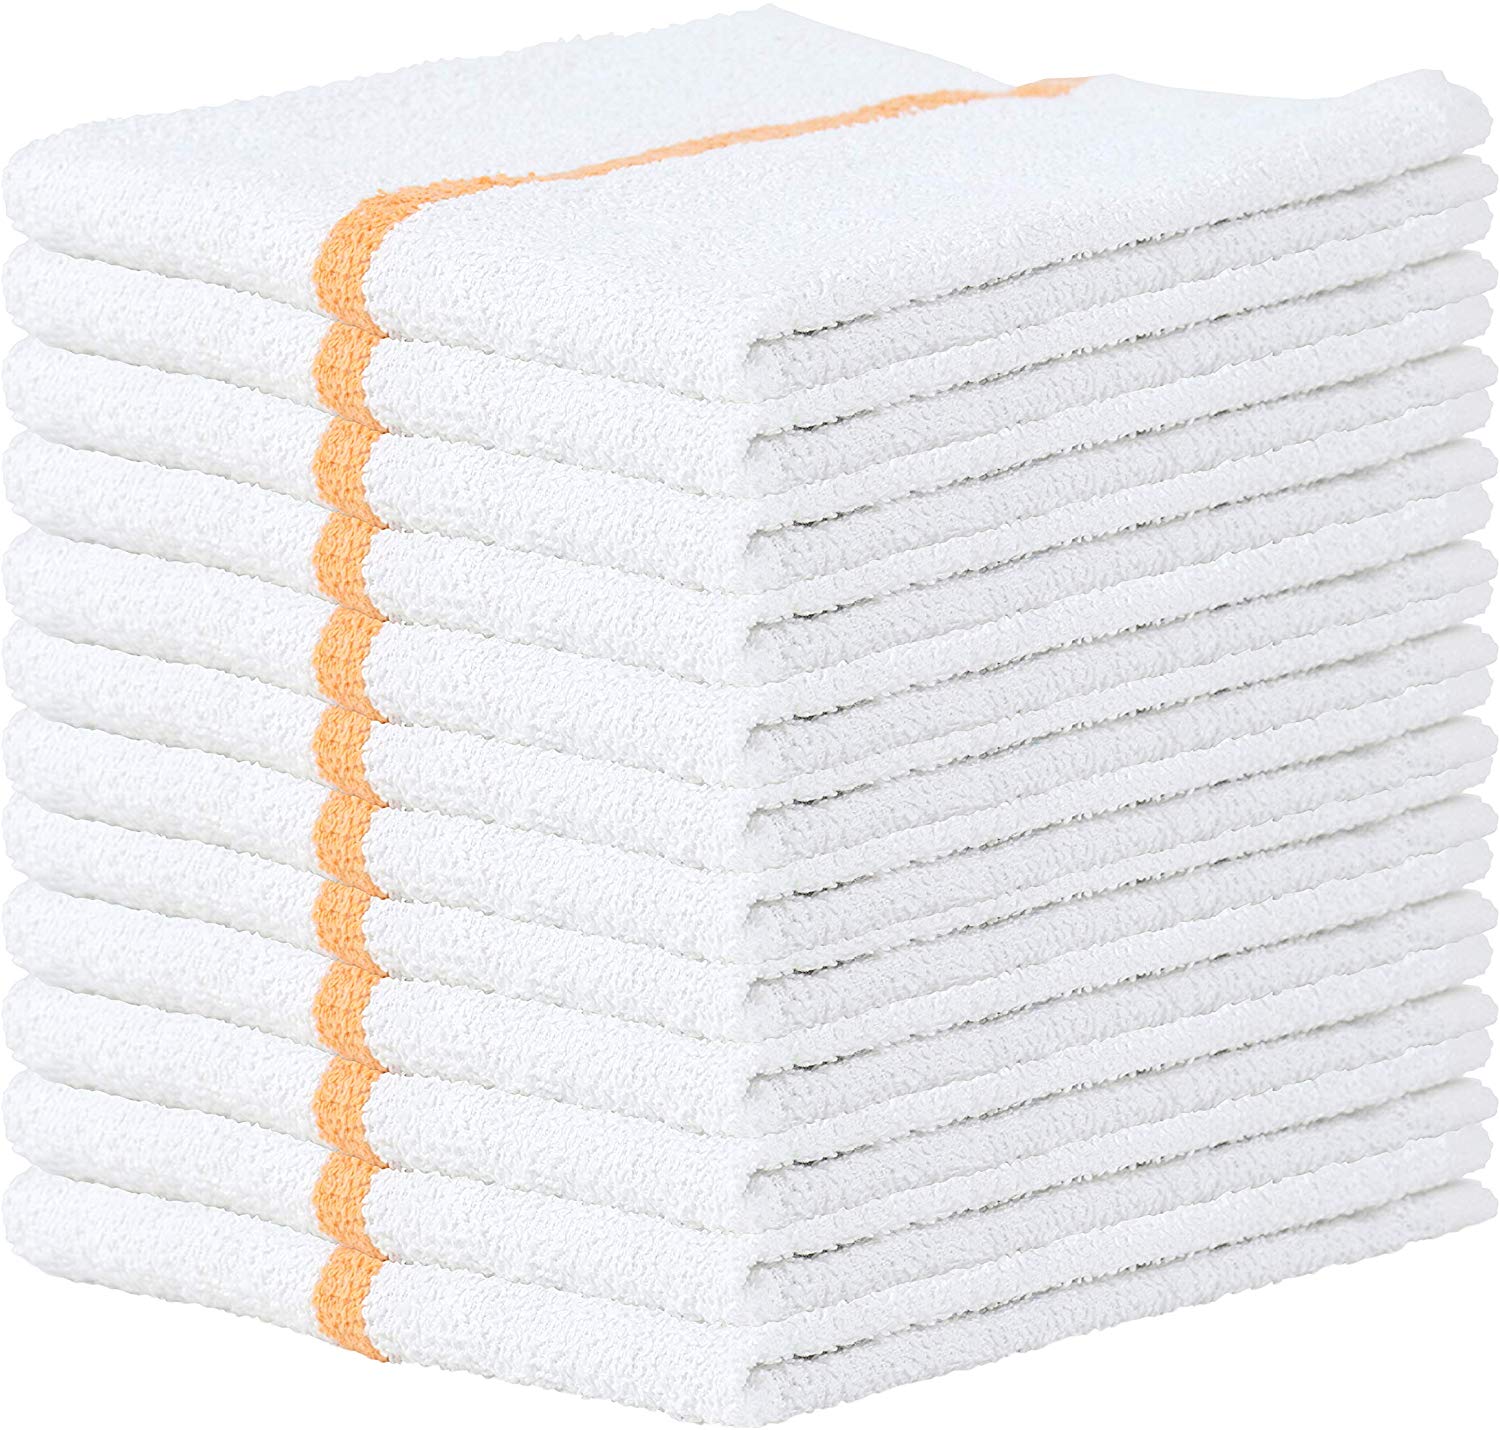 12 Pack of Qwick Wick (16 x 19) Terry Towels -For Cleaning/Bar Mop - Gold Stripe